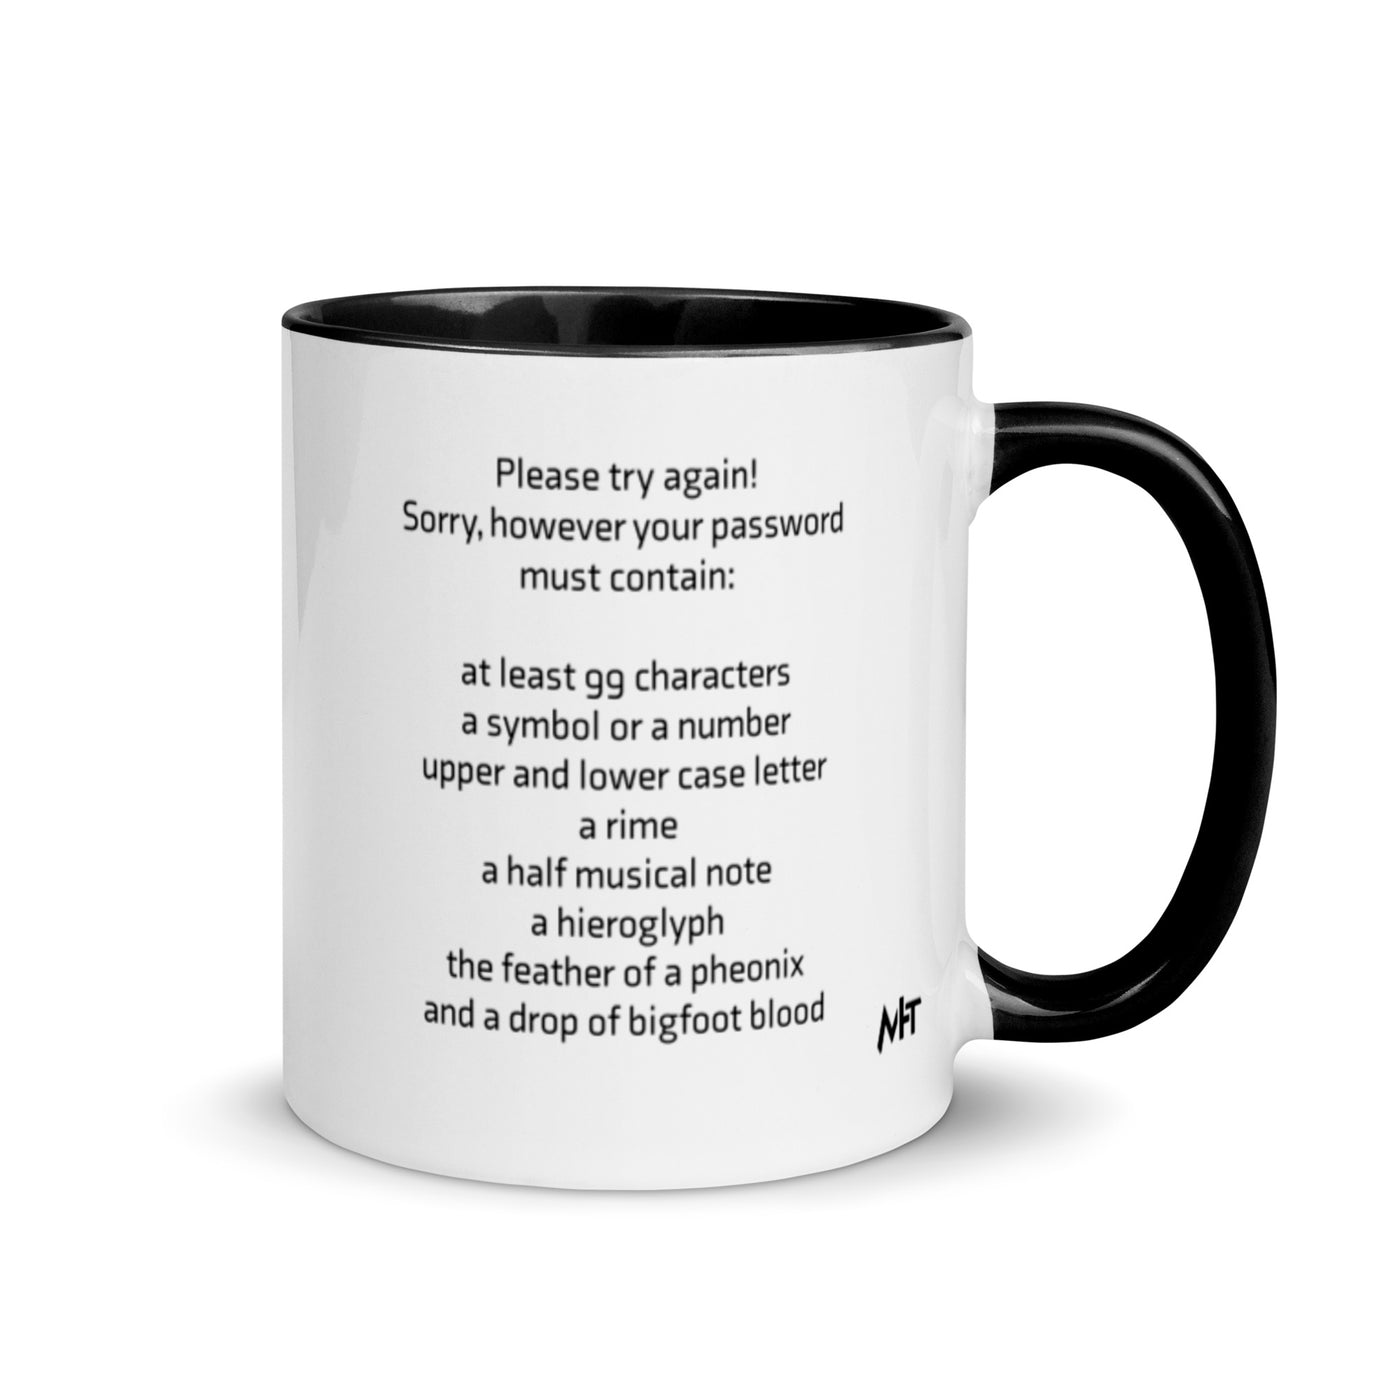 Sorry, but your password must contain - White glossy mug